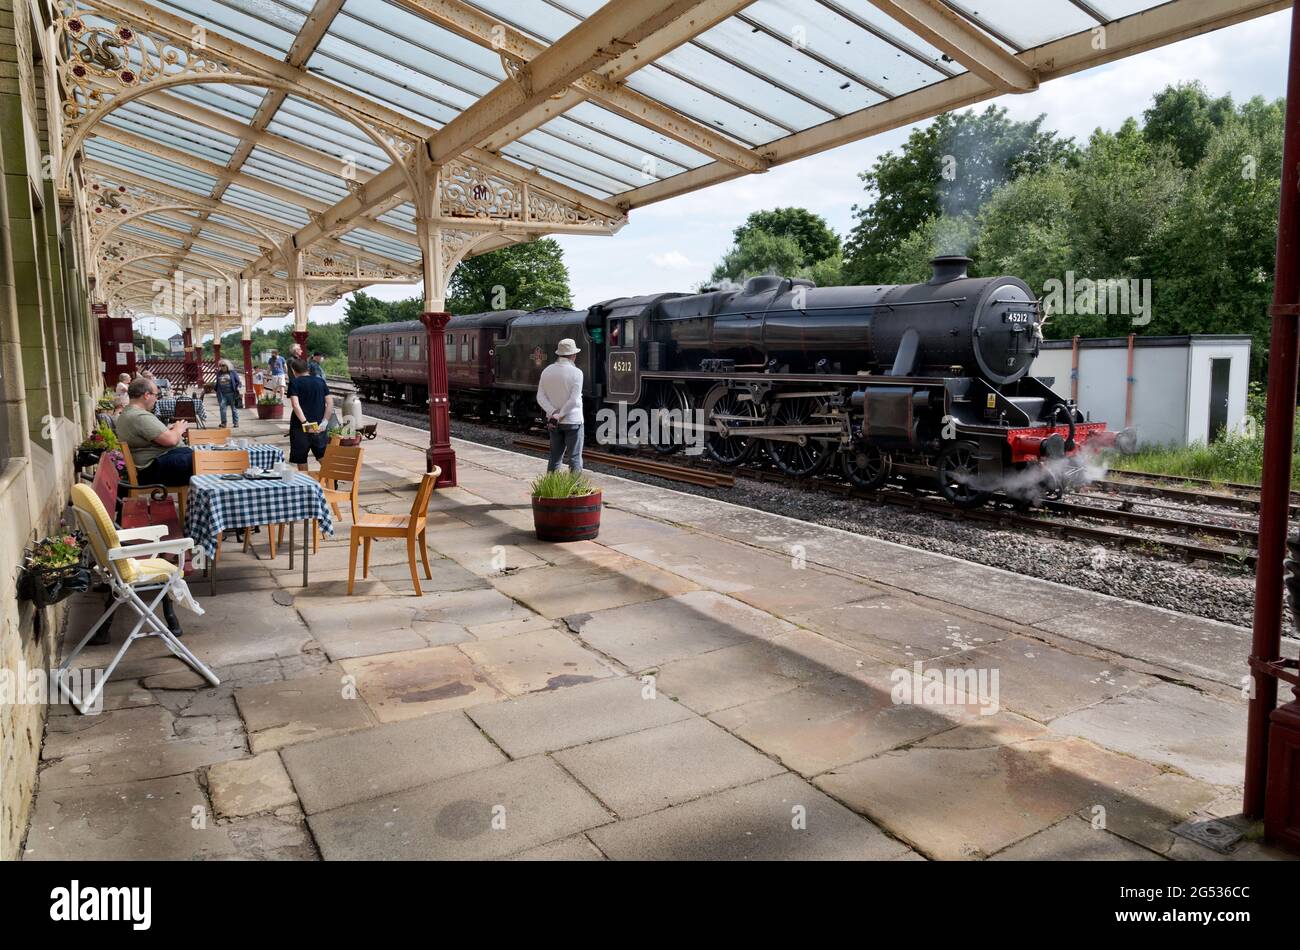 A Black Five steam locomotive is admired by visitors to Hellifield Station cafe, Hellifield, North Yorkshire, UK Stock Photo